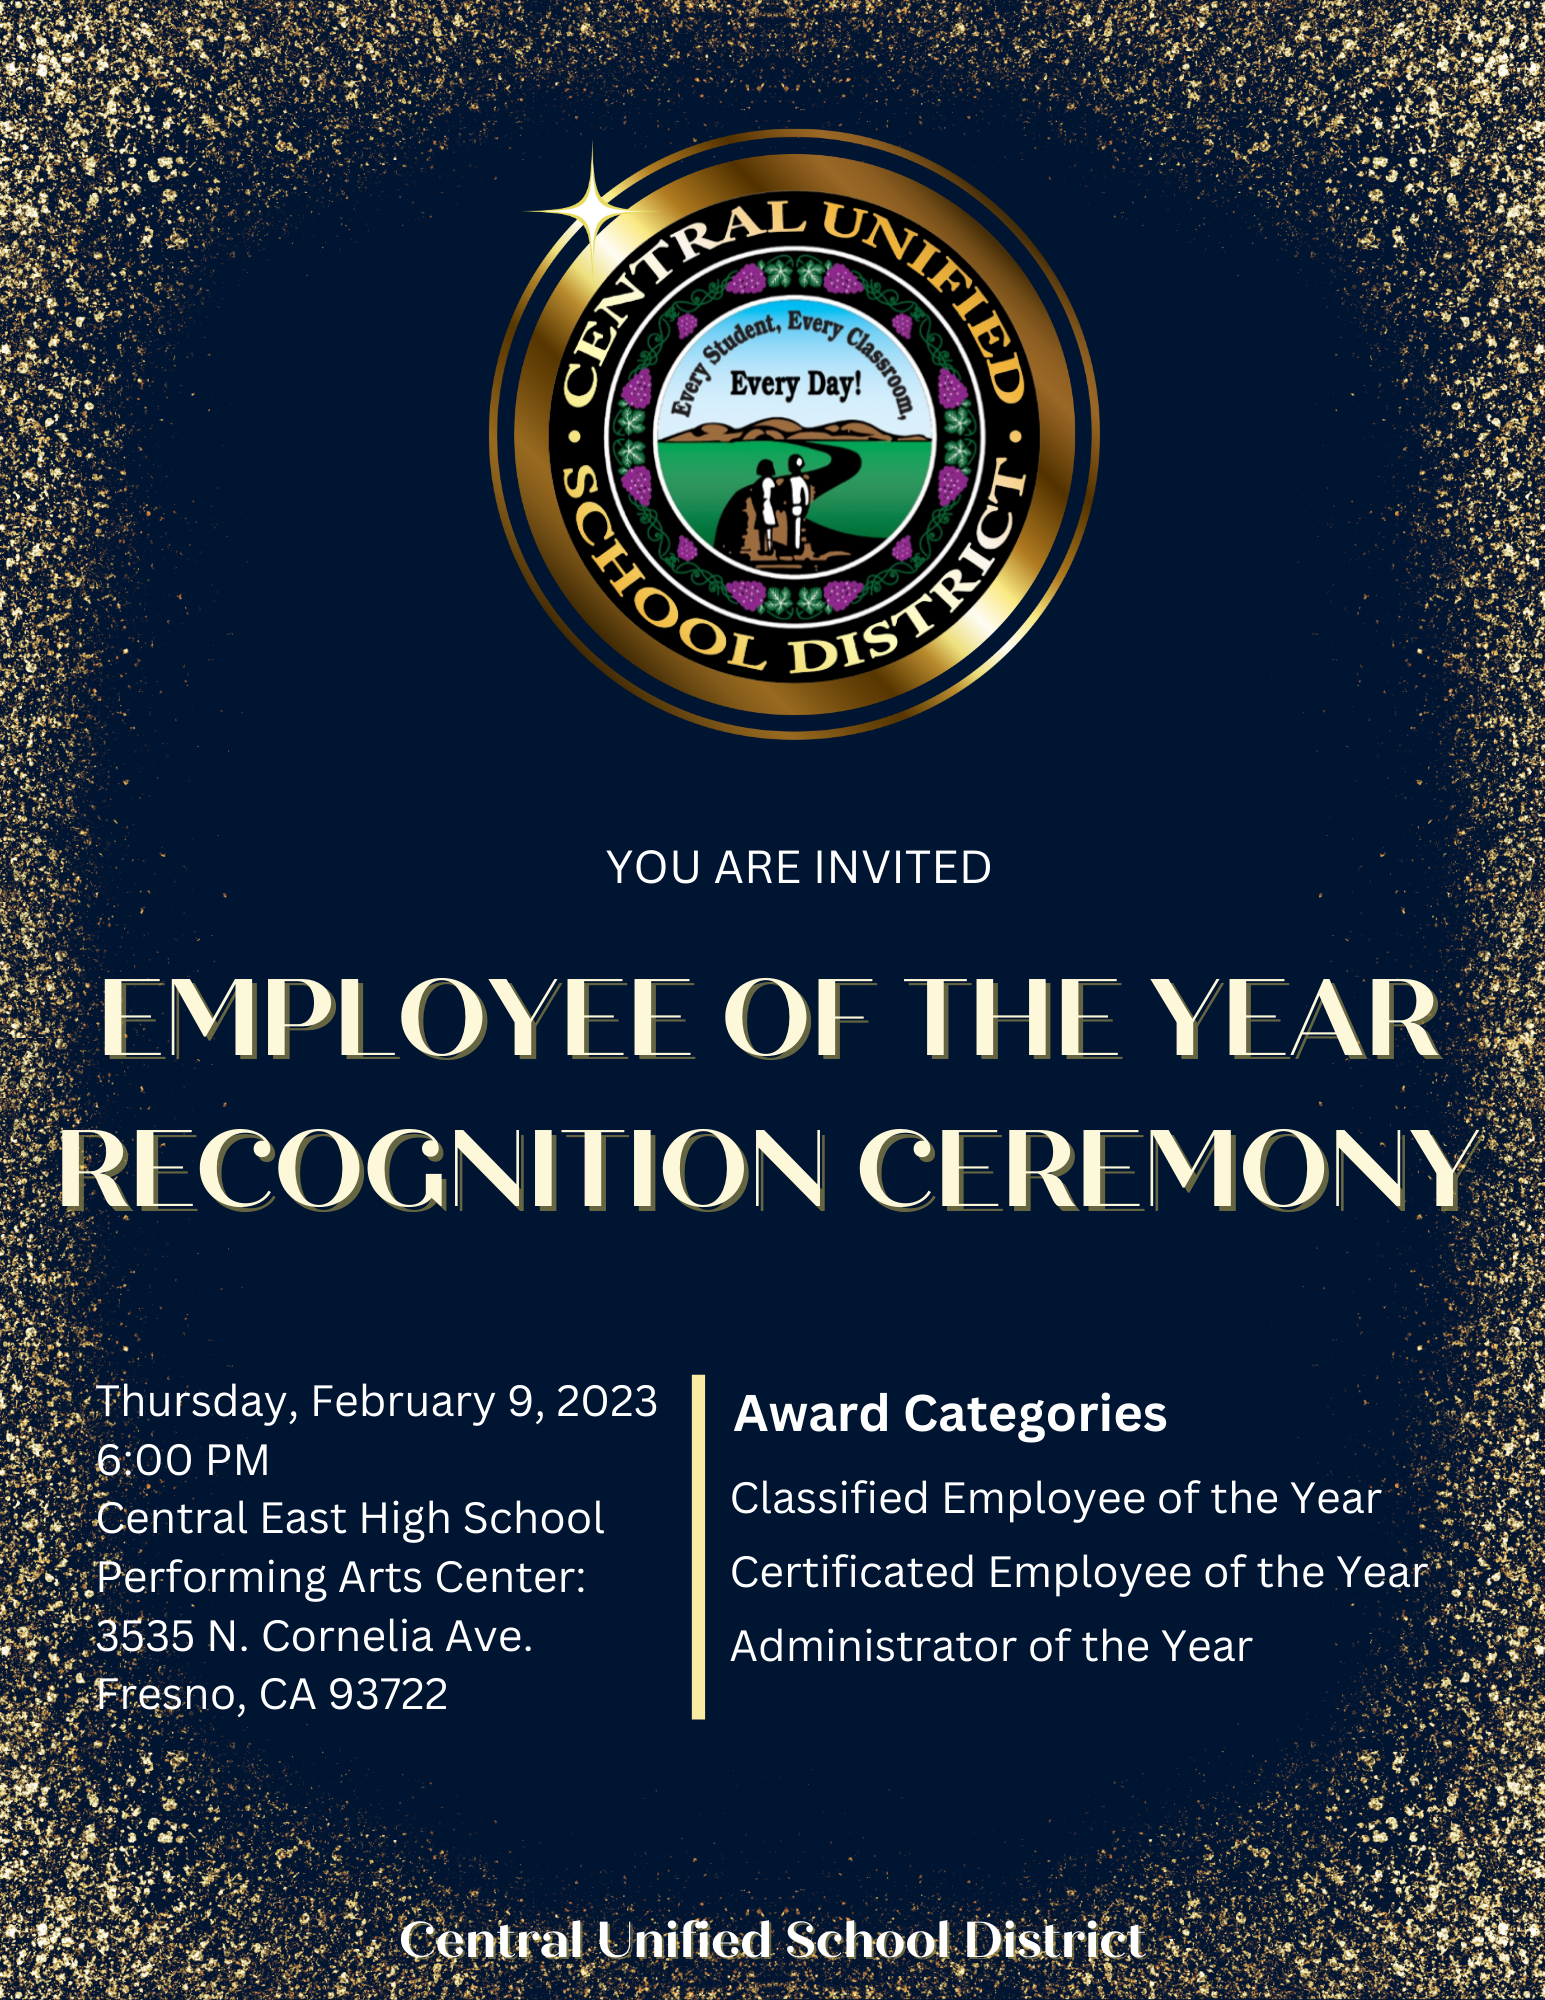 Employee of the Year invitation 